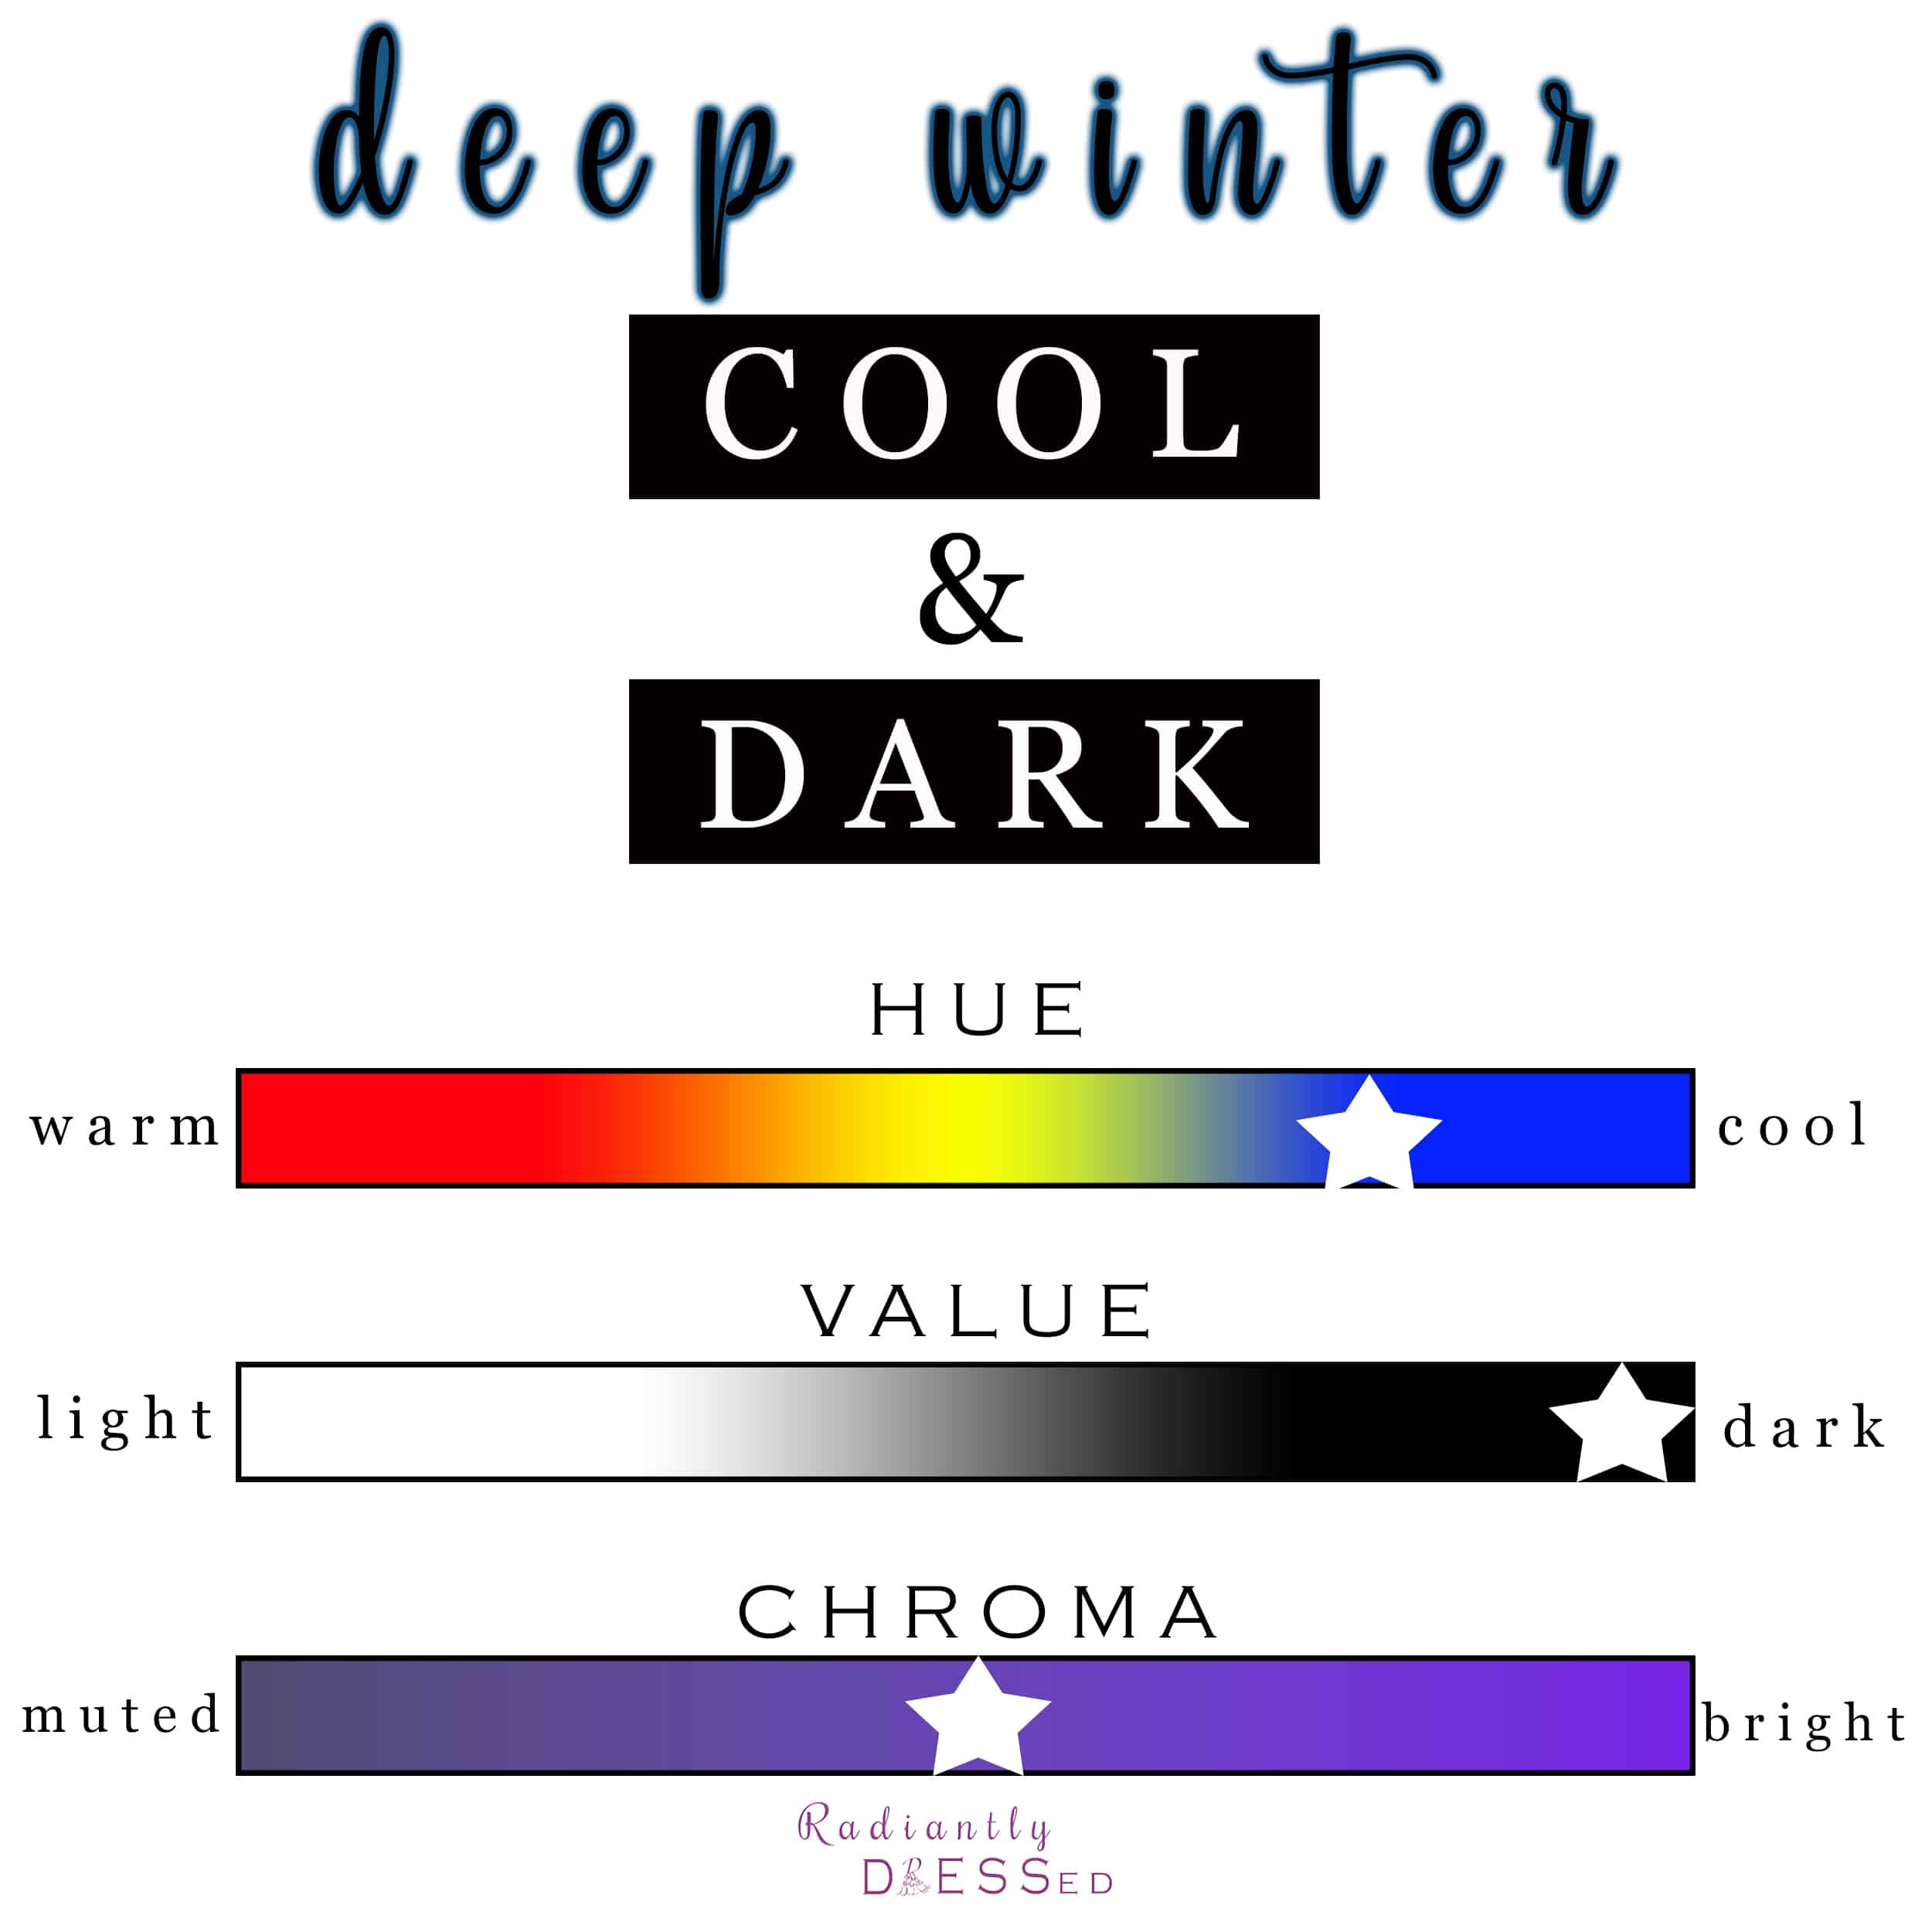 Deep winter is cool and dark.